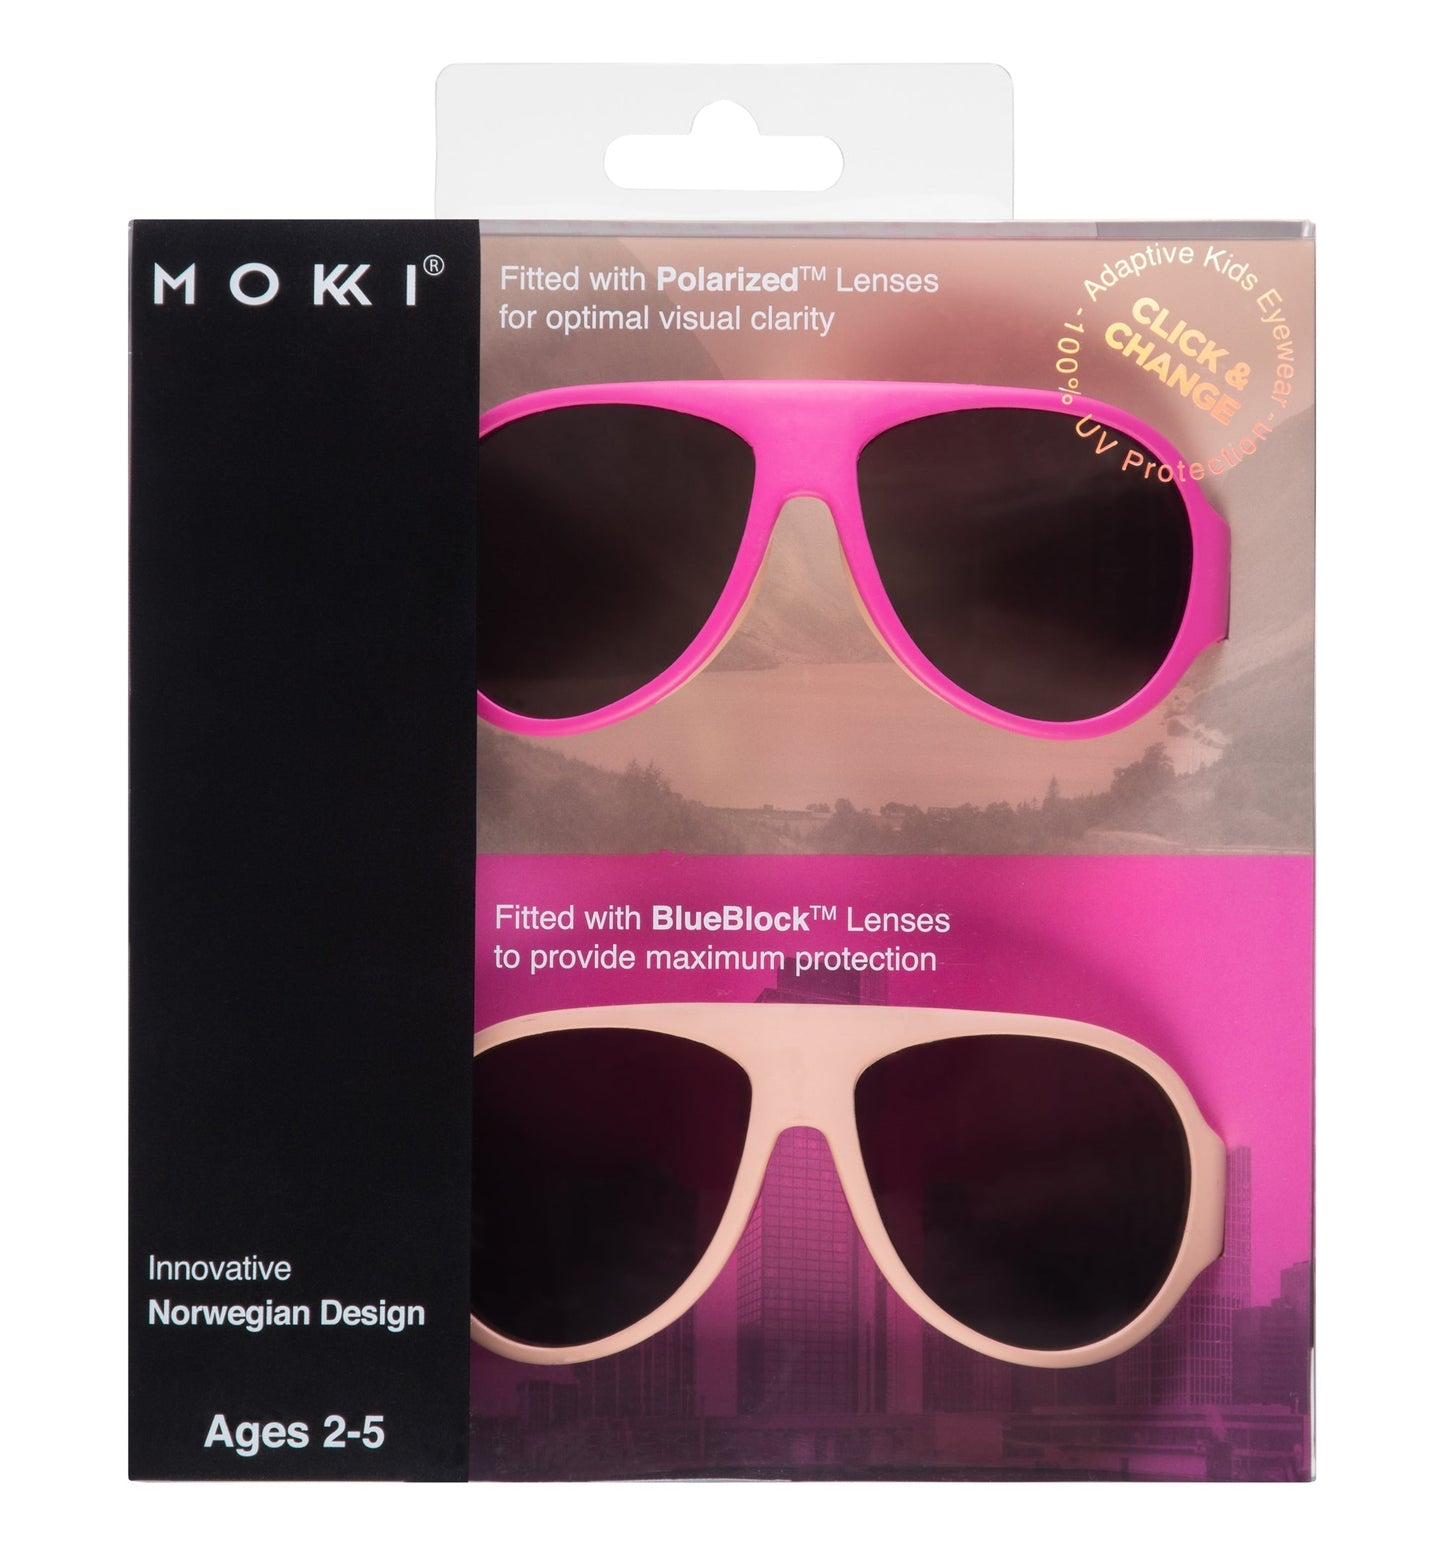 Mokki Click & Change-sunglasses for kids ages 2-5 in pink